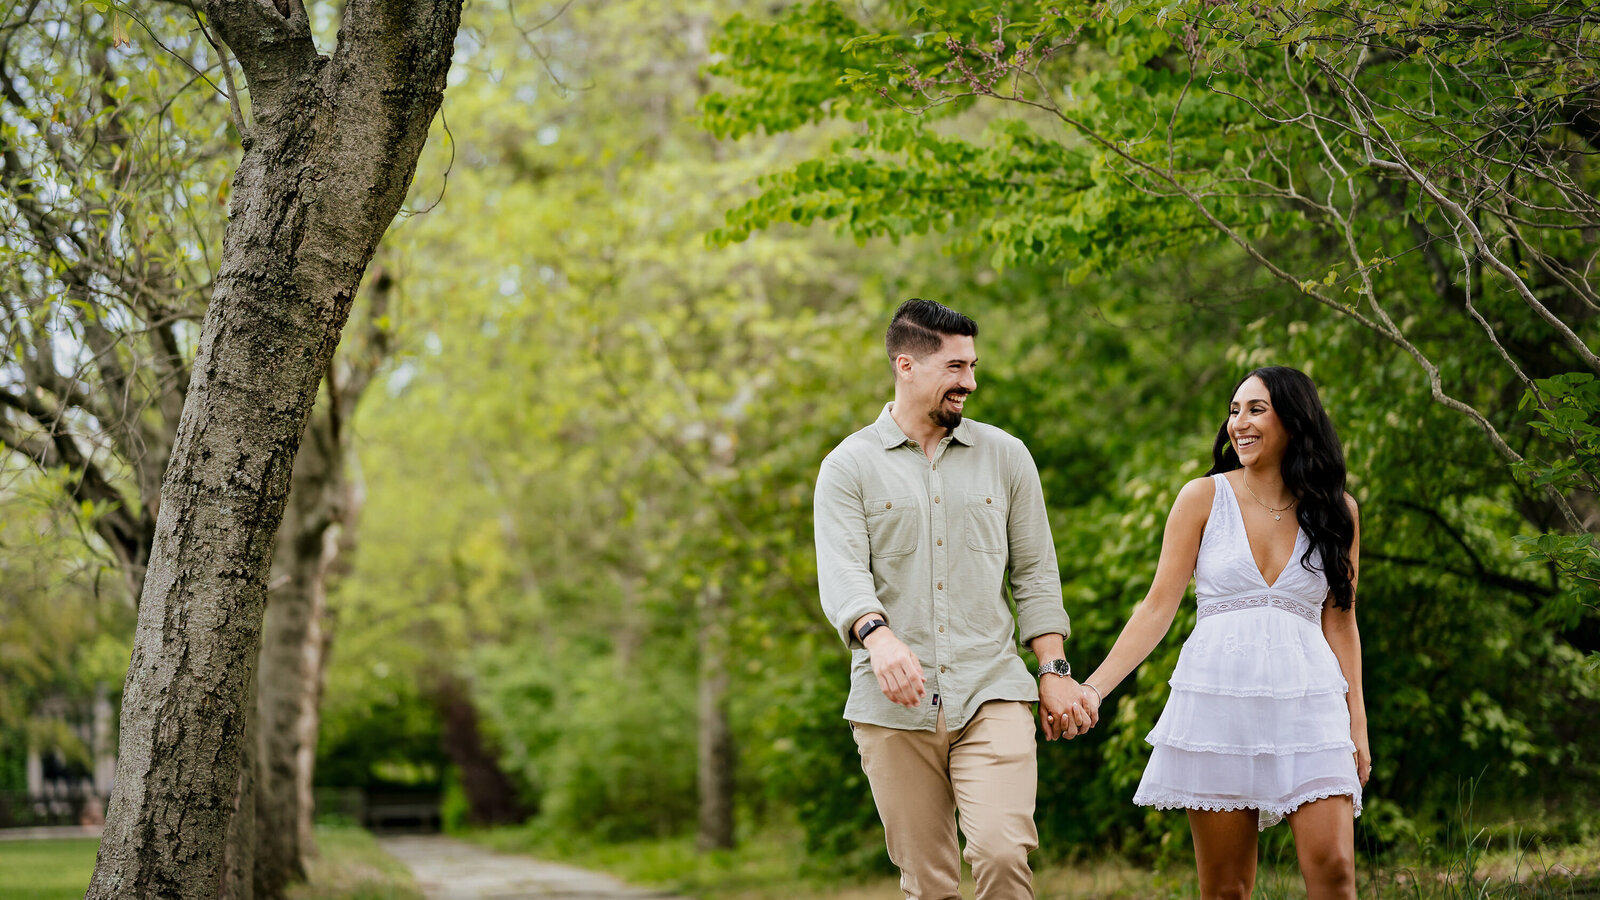 Find inspiration for your Skyland Manor engagement photoshoot by Ishan Fotografi.